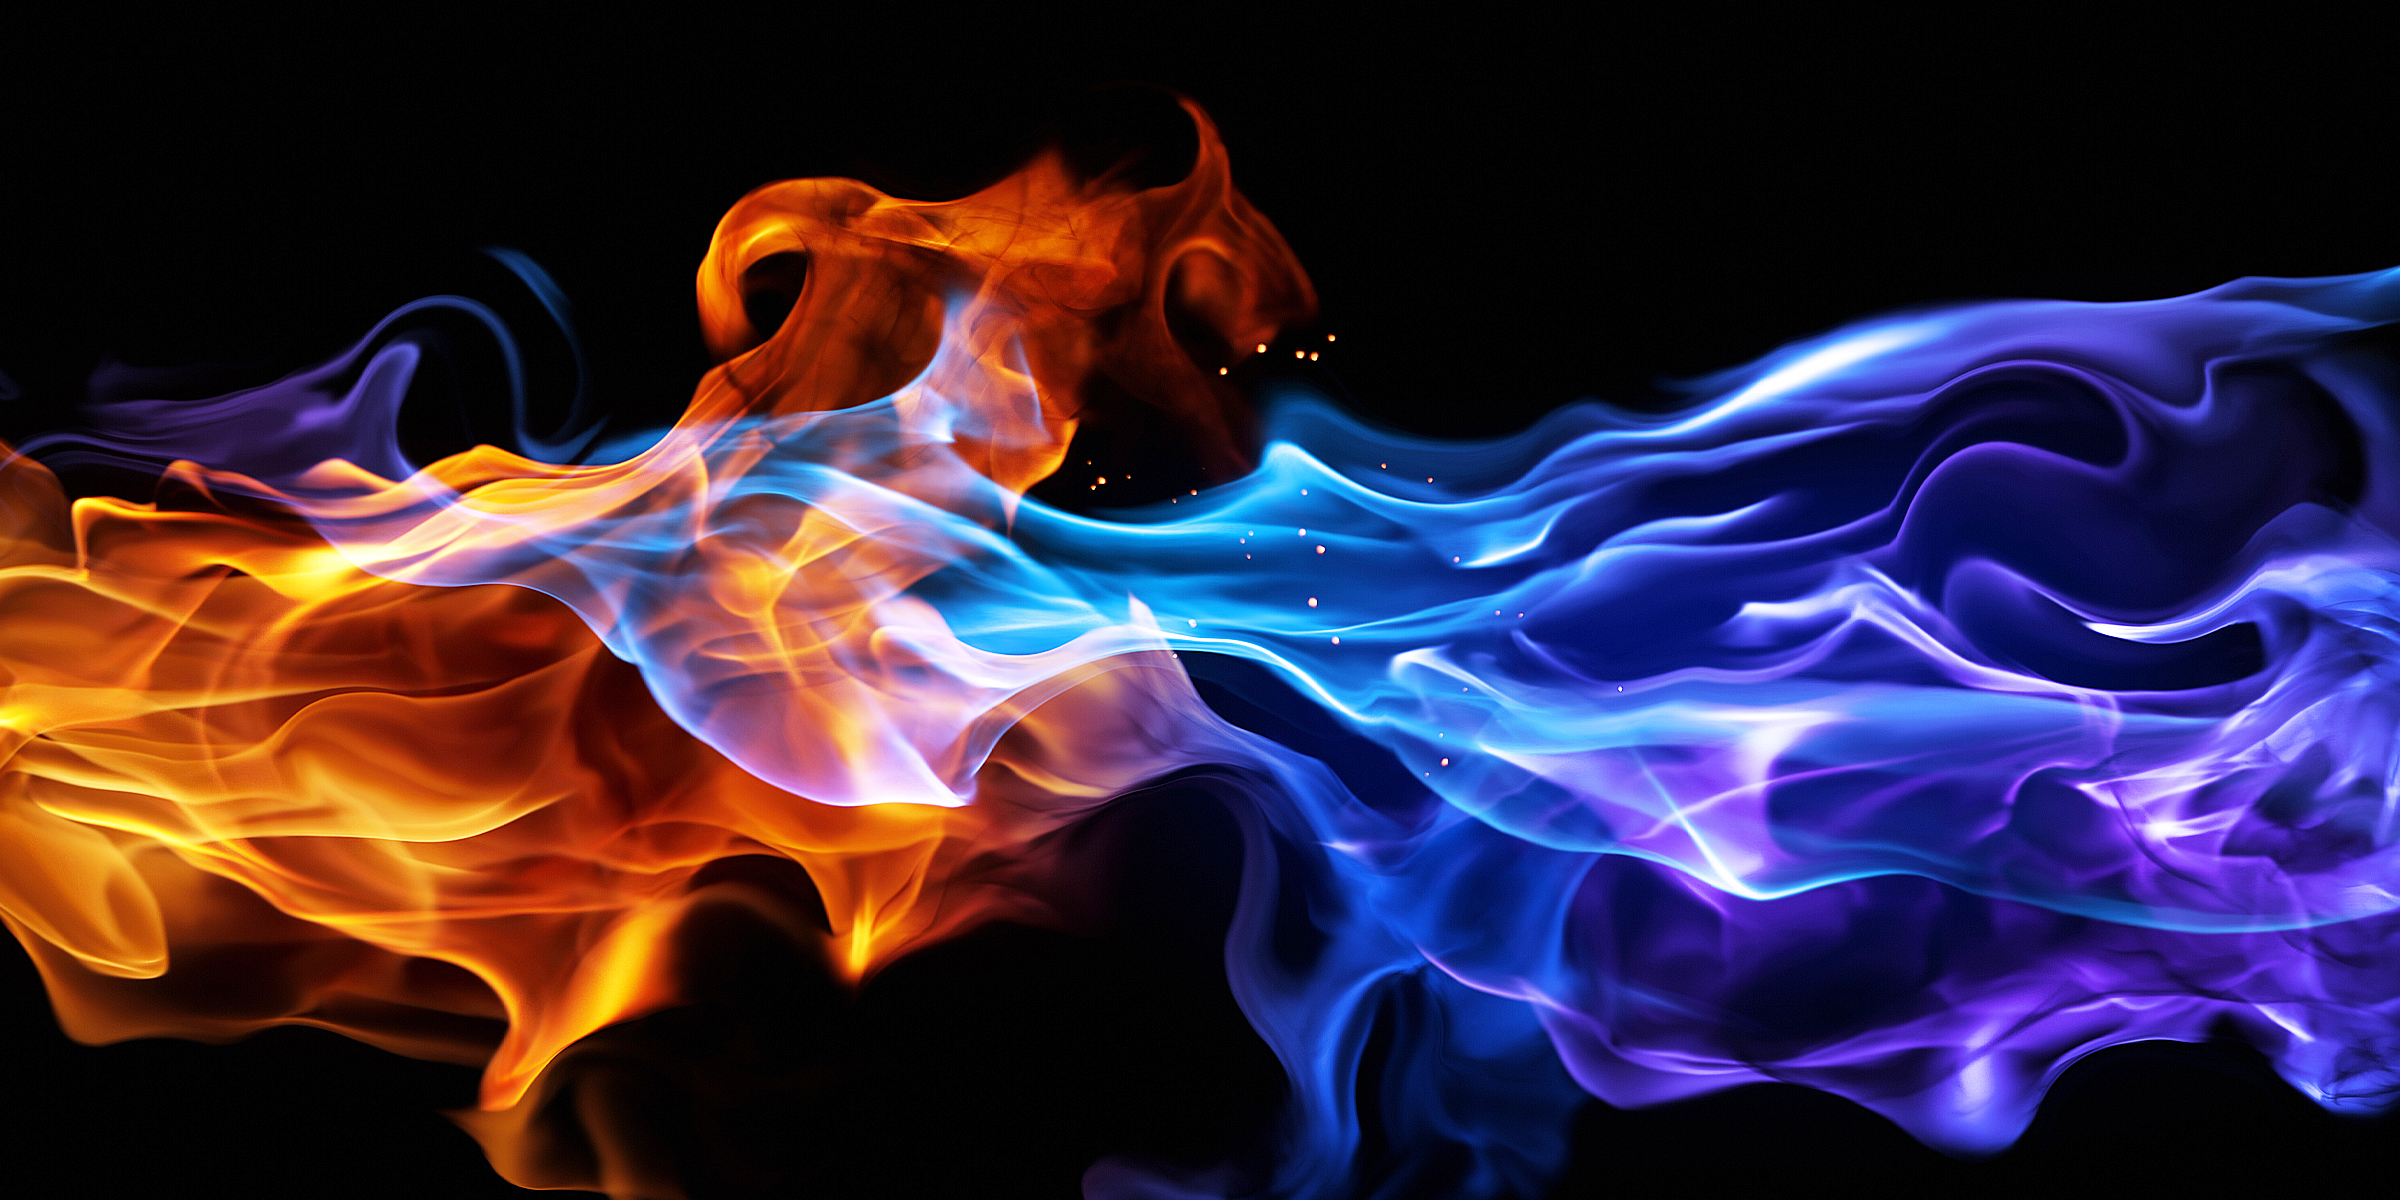 Red and blue fire | Source: Shutterstock